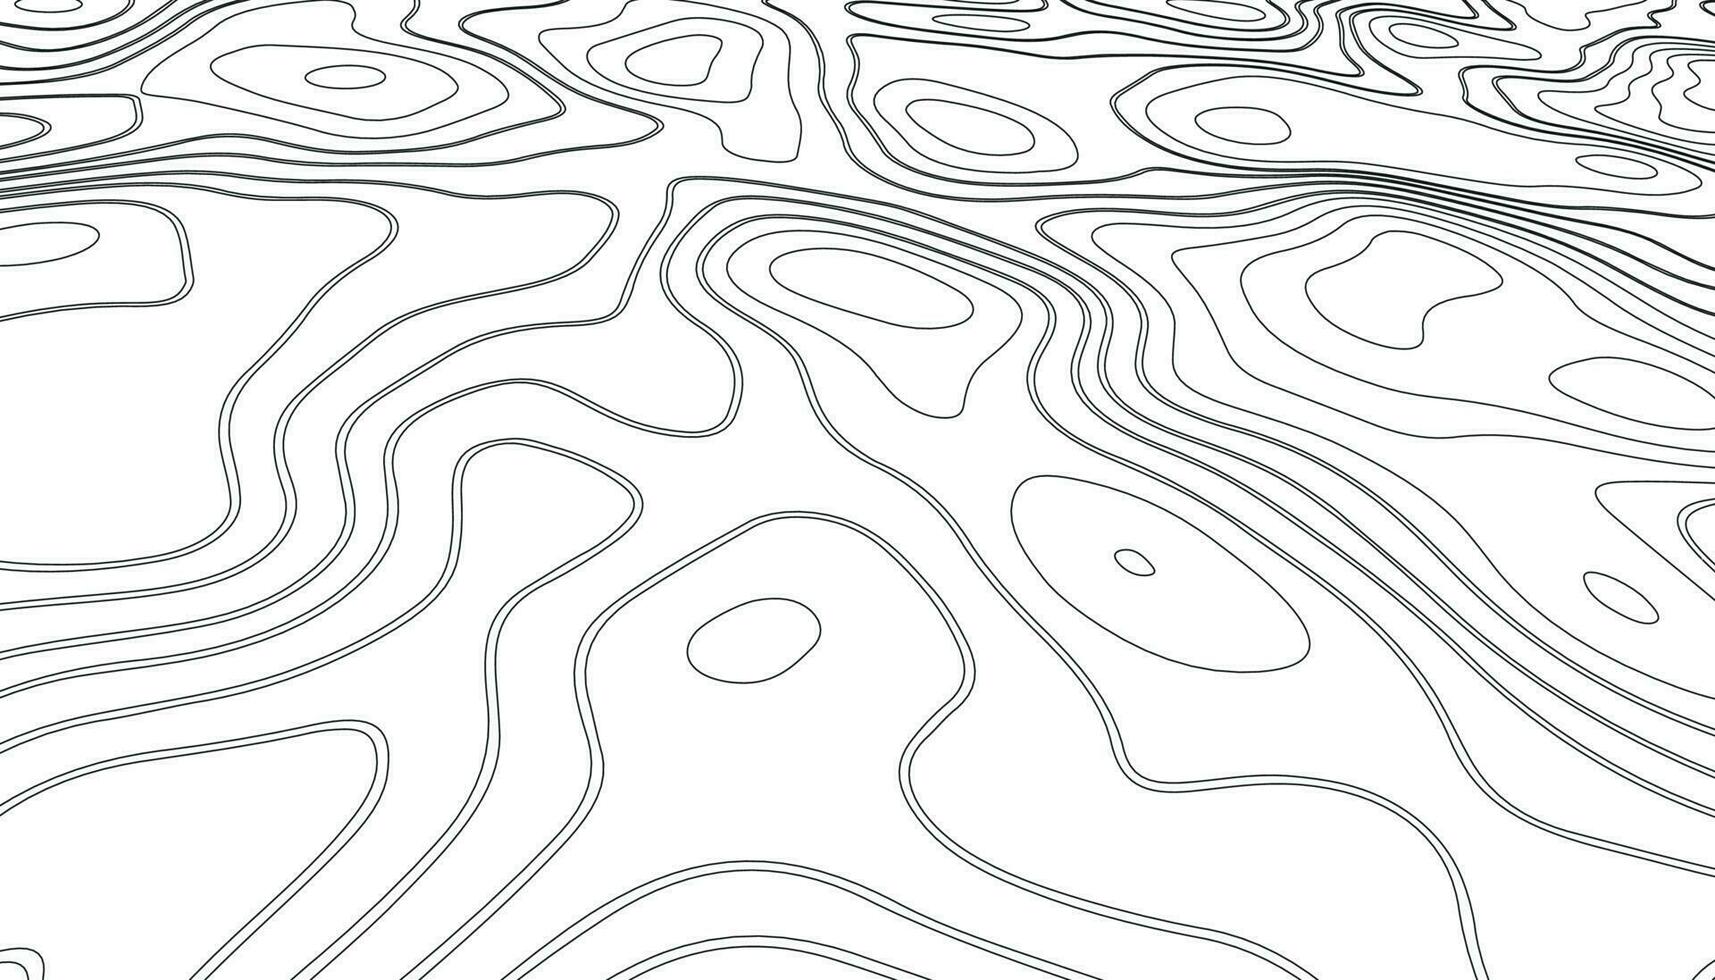 Topography line map. Vintage outdoors style. vector